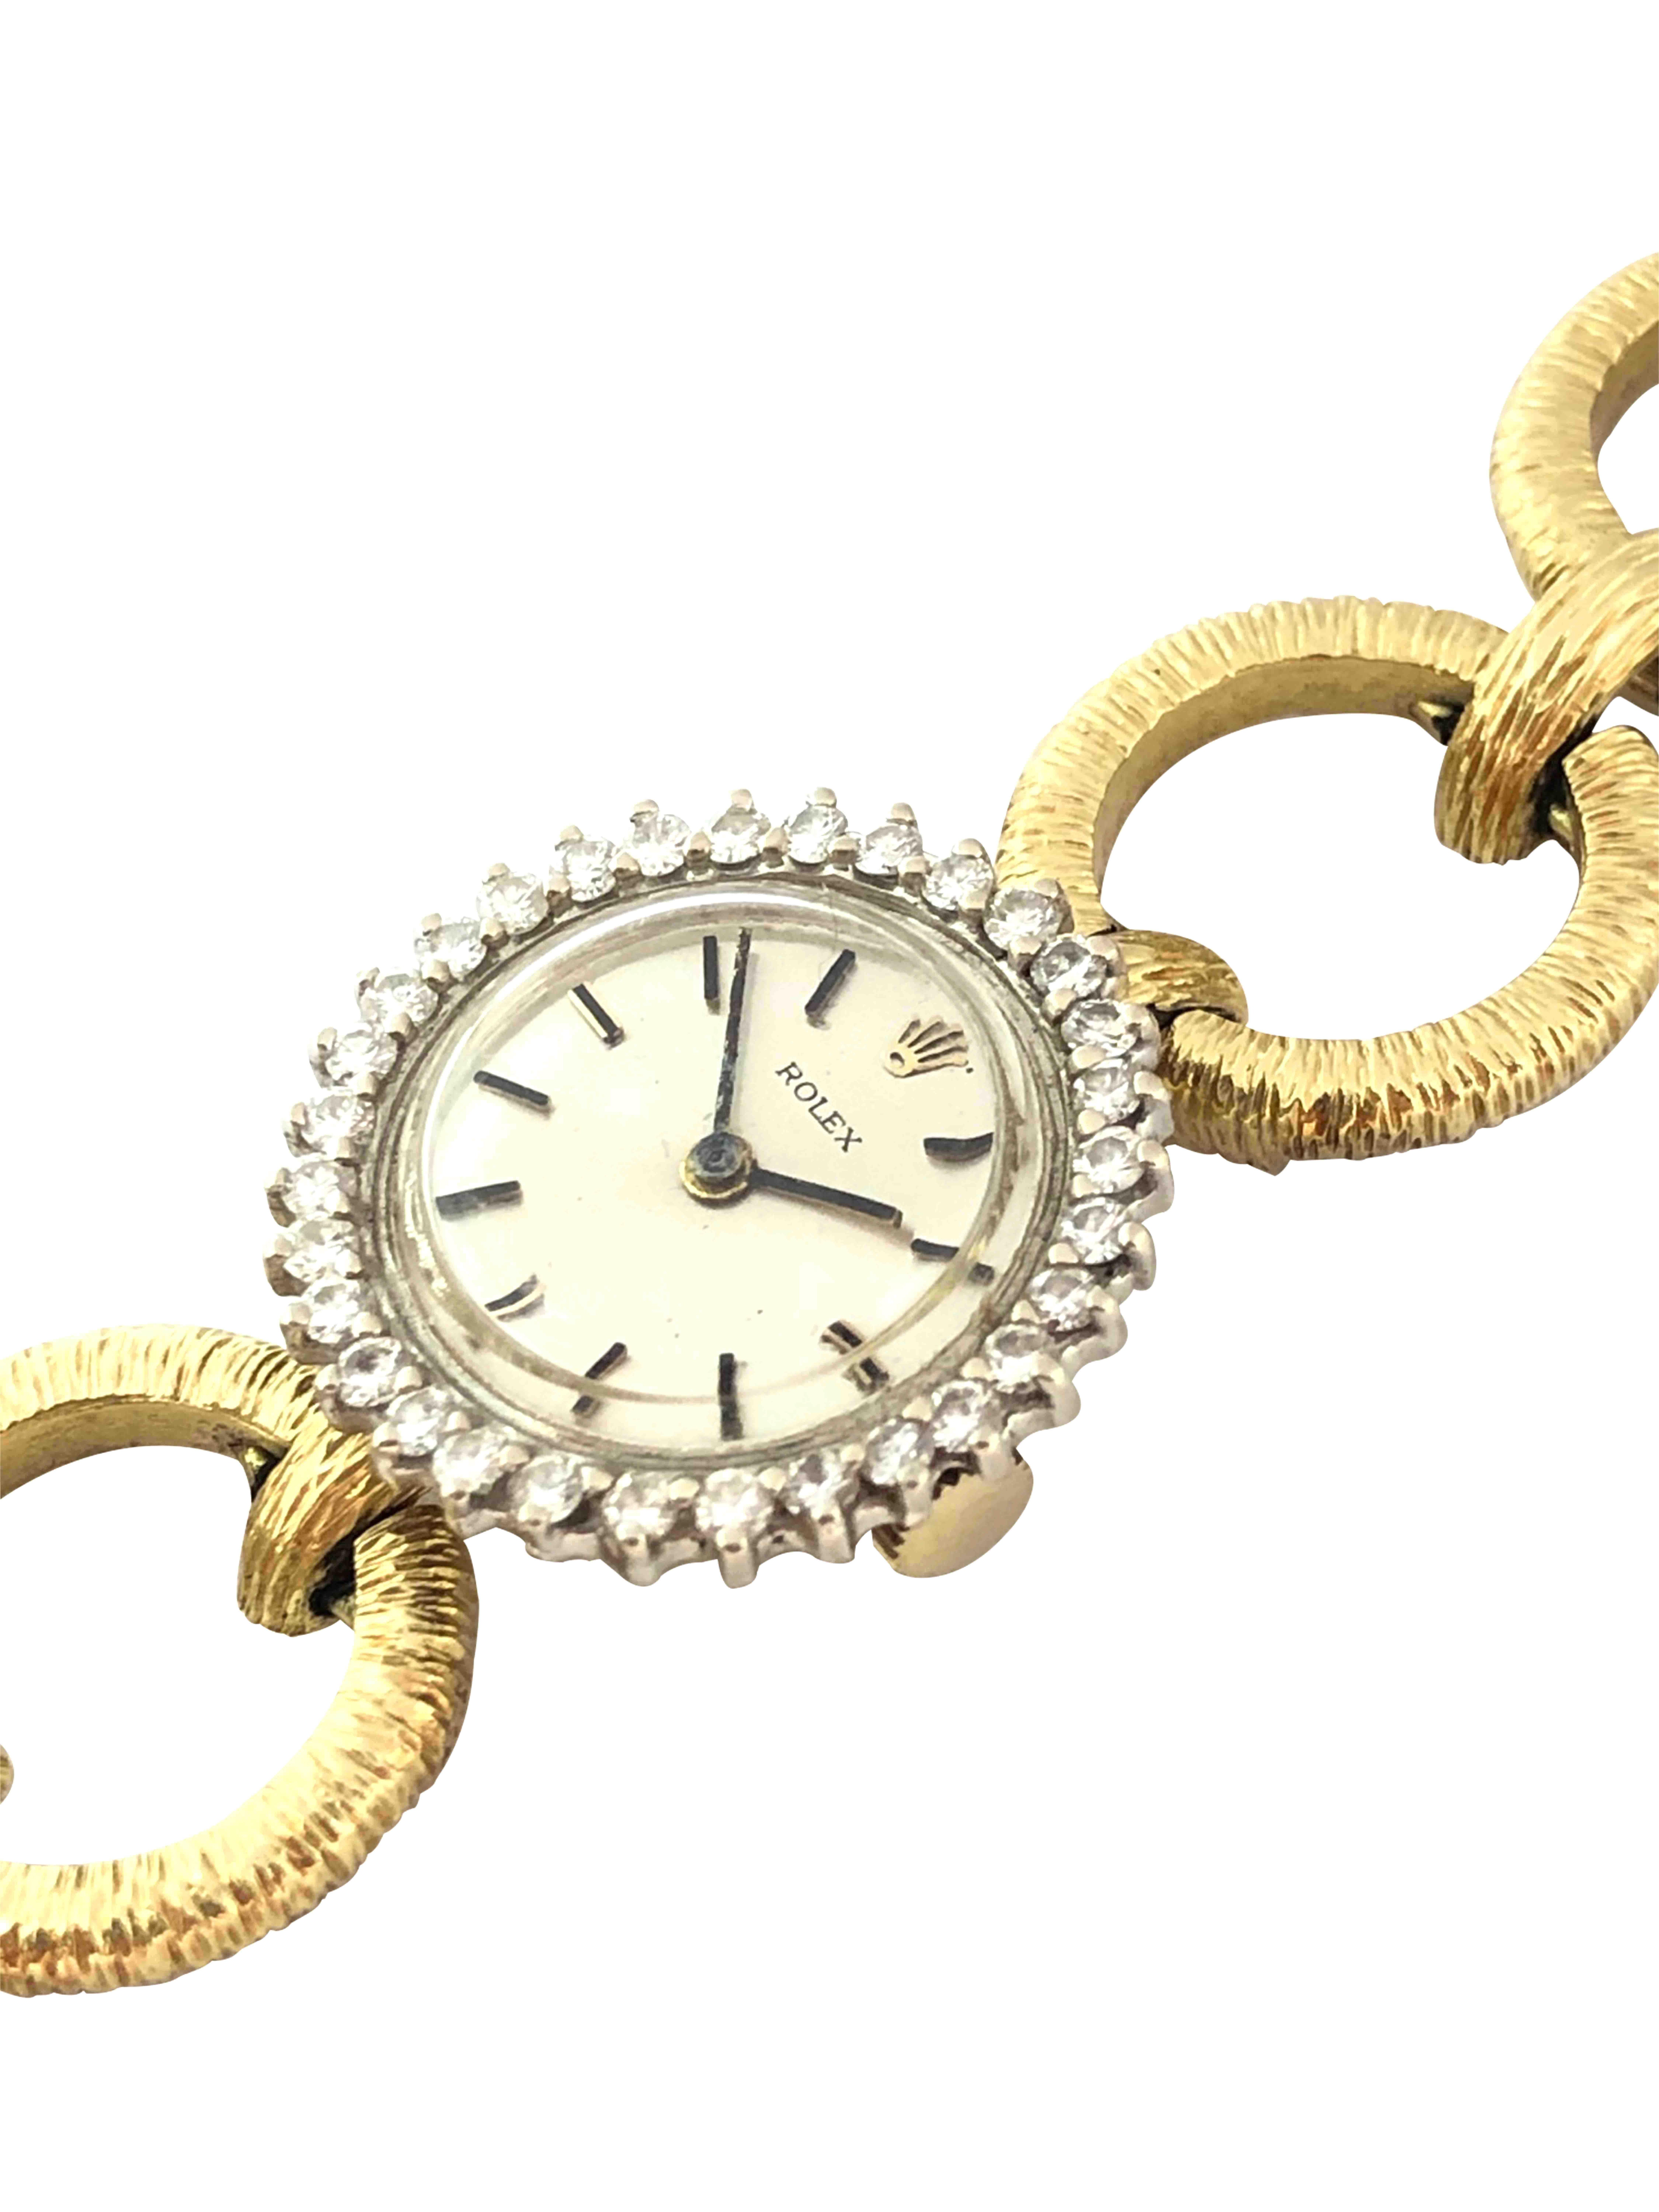 Circa 1960s Rolex Ladies Bracelet Wrist watch, 22 M.M. 14K Yellow Gold 2 piece case with a Bezel of Round Brilliant cut Diamonds totaling 1 Carat. 17 Jewel mechanical, manual wind movement, Silver satin dial with raised markers. Textured finish